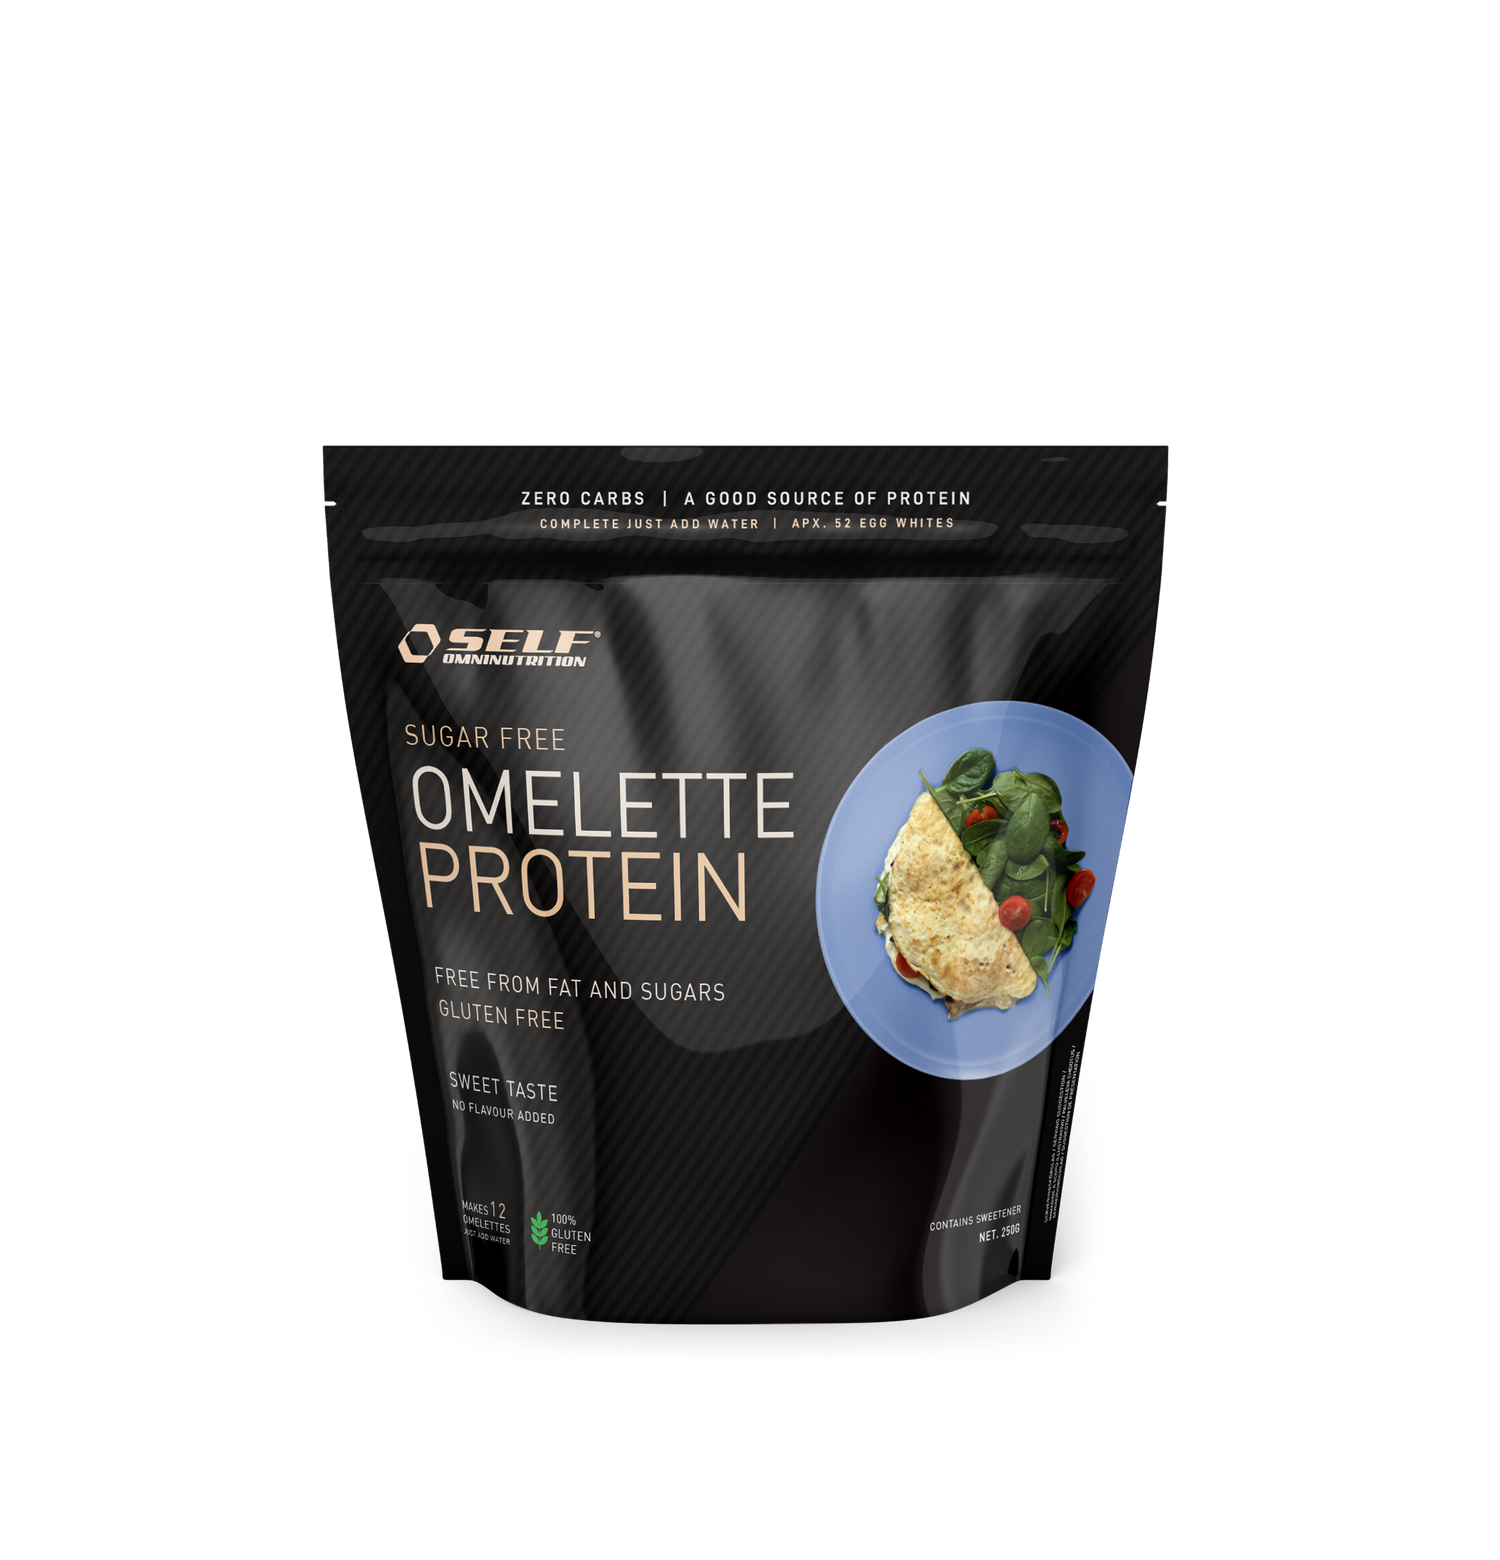 Omelette protein